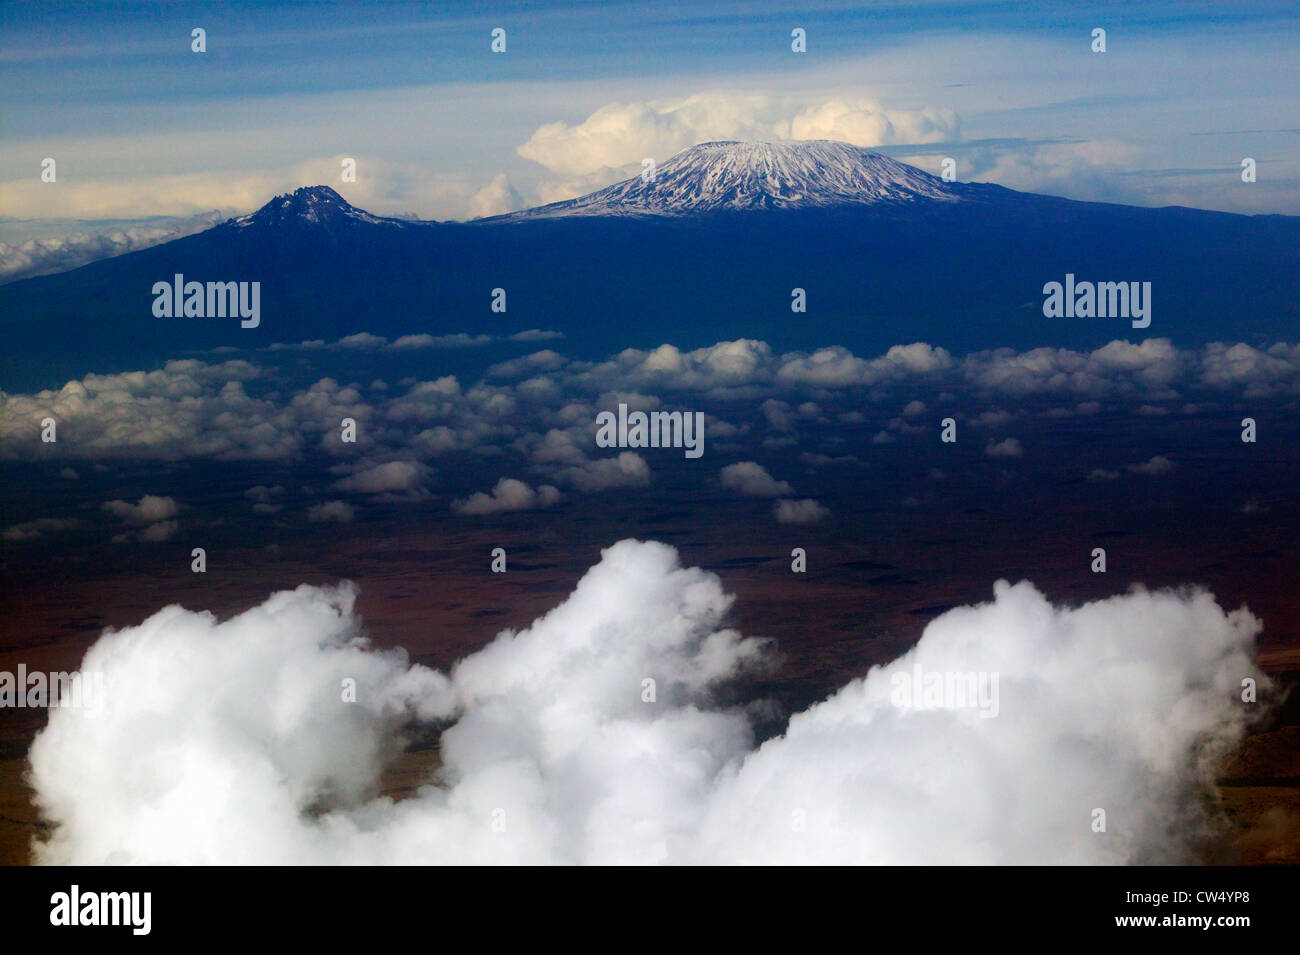 Aerial image of Mount Kilimanjaro, Africa's highest mountain, with snow and white puffy clouds from Kenya Stock Photo